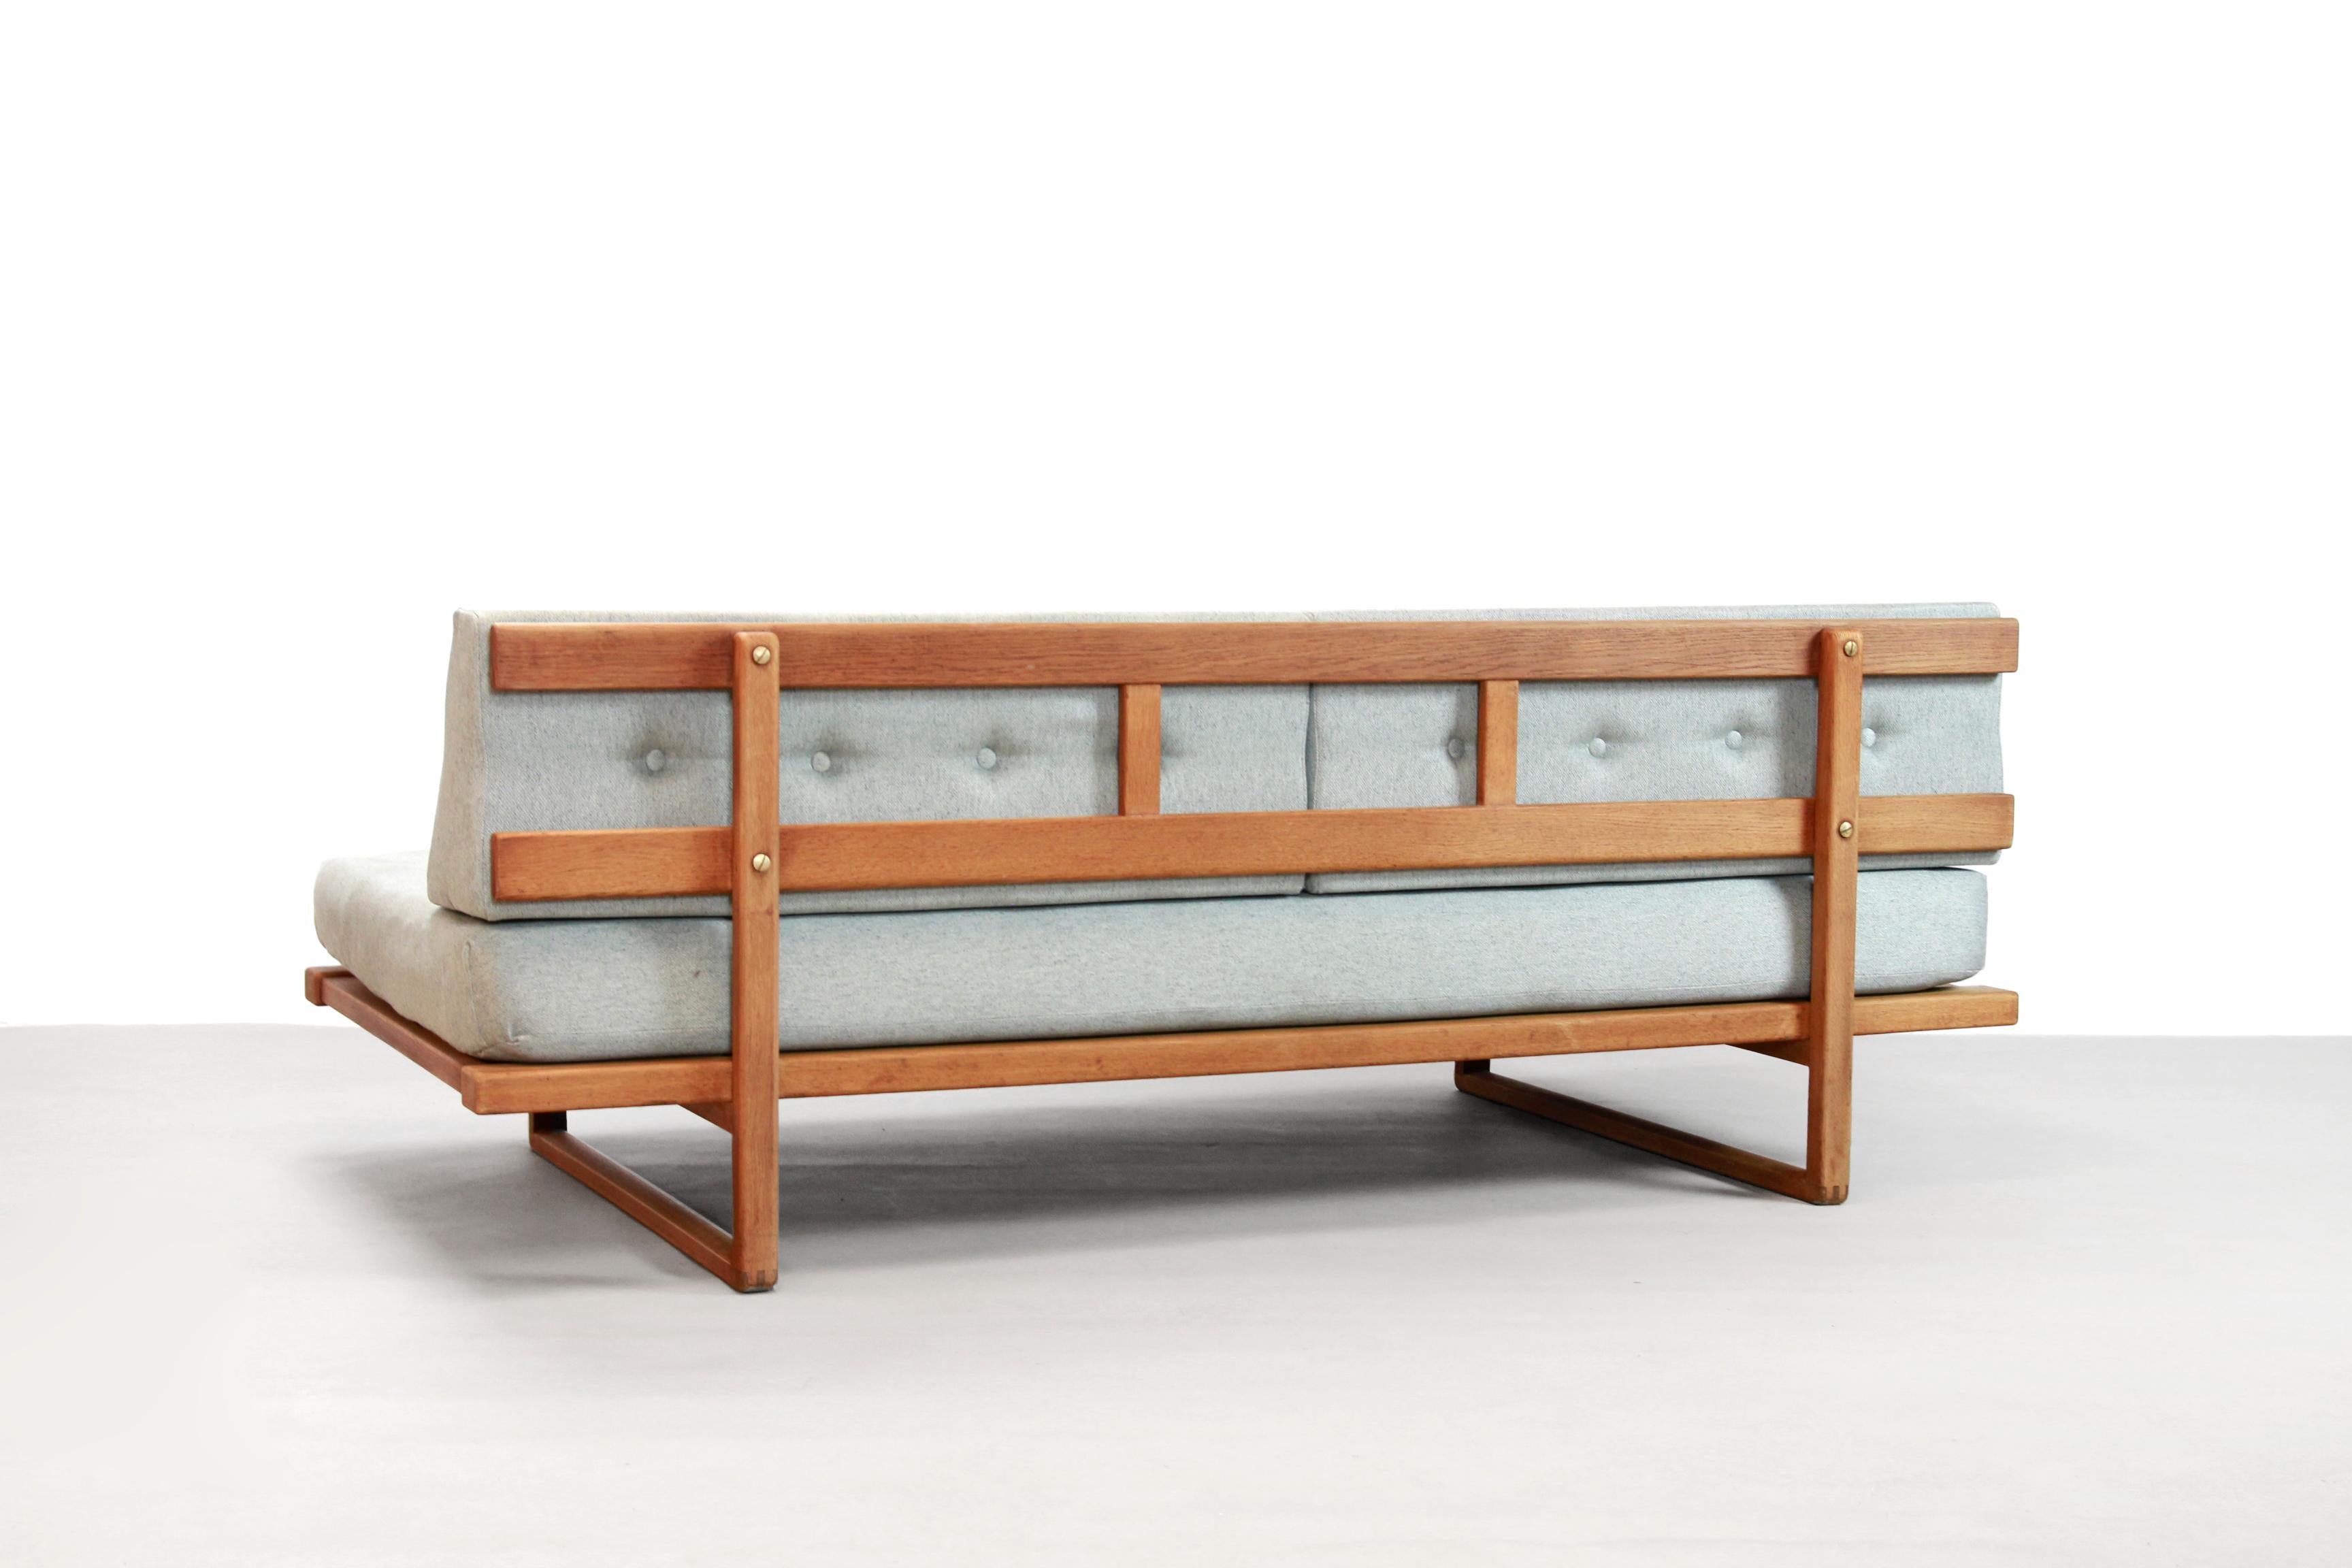 Solid oak wooden daybed designed in the late 1950s by Danish designer Børge Mogensen and produced by Fredericia Stolefabrik, Denmark. This sofa is named model 4312 or model 312 and is made of solid oakwood, brass details and deep buttoned cushions